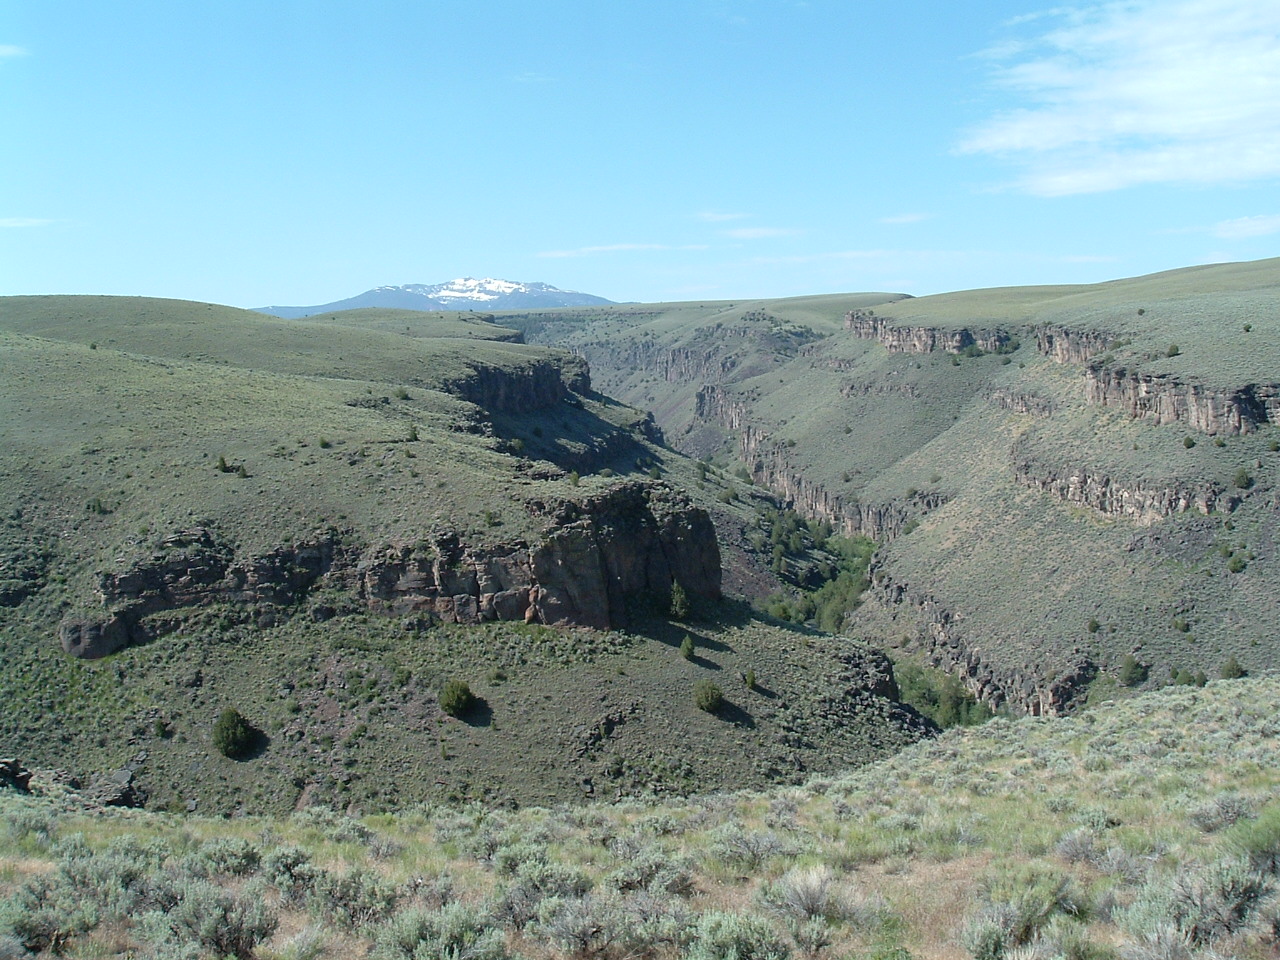 Figure 2. East Fork of the Jarbidge River (Philip A. Homan). The 10,789-feet Jarbidge Peak (at back) of the Jarbidge Mountains and the deep canyons of the Jarbidge River and its East Fork (at front) made for an ideal corral for the Wilkins Horse Company’s herd of 10,000 horses running on the Wilkins Island range (at right), which helped make the company and its boss, Kittie Wilkins, famous.